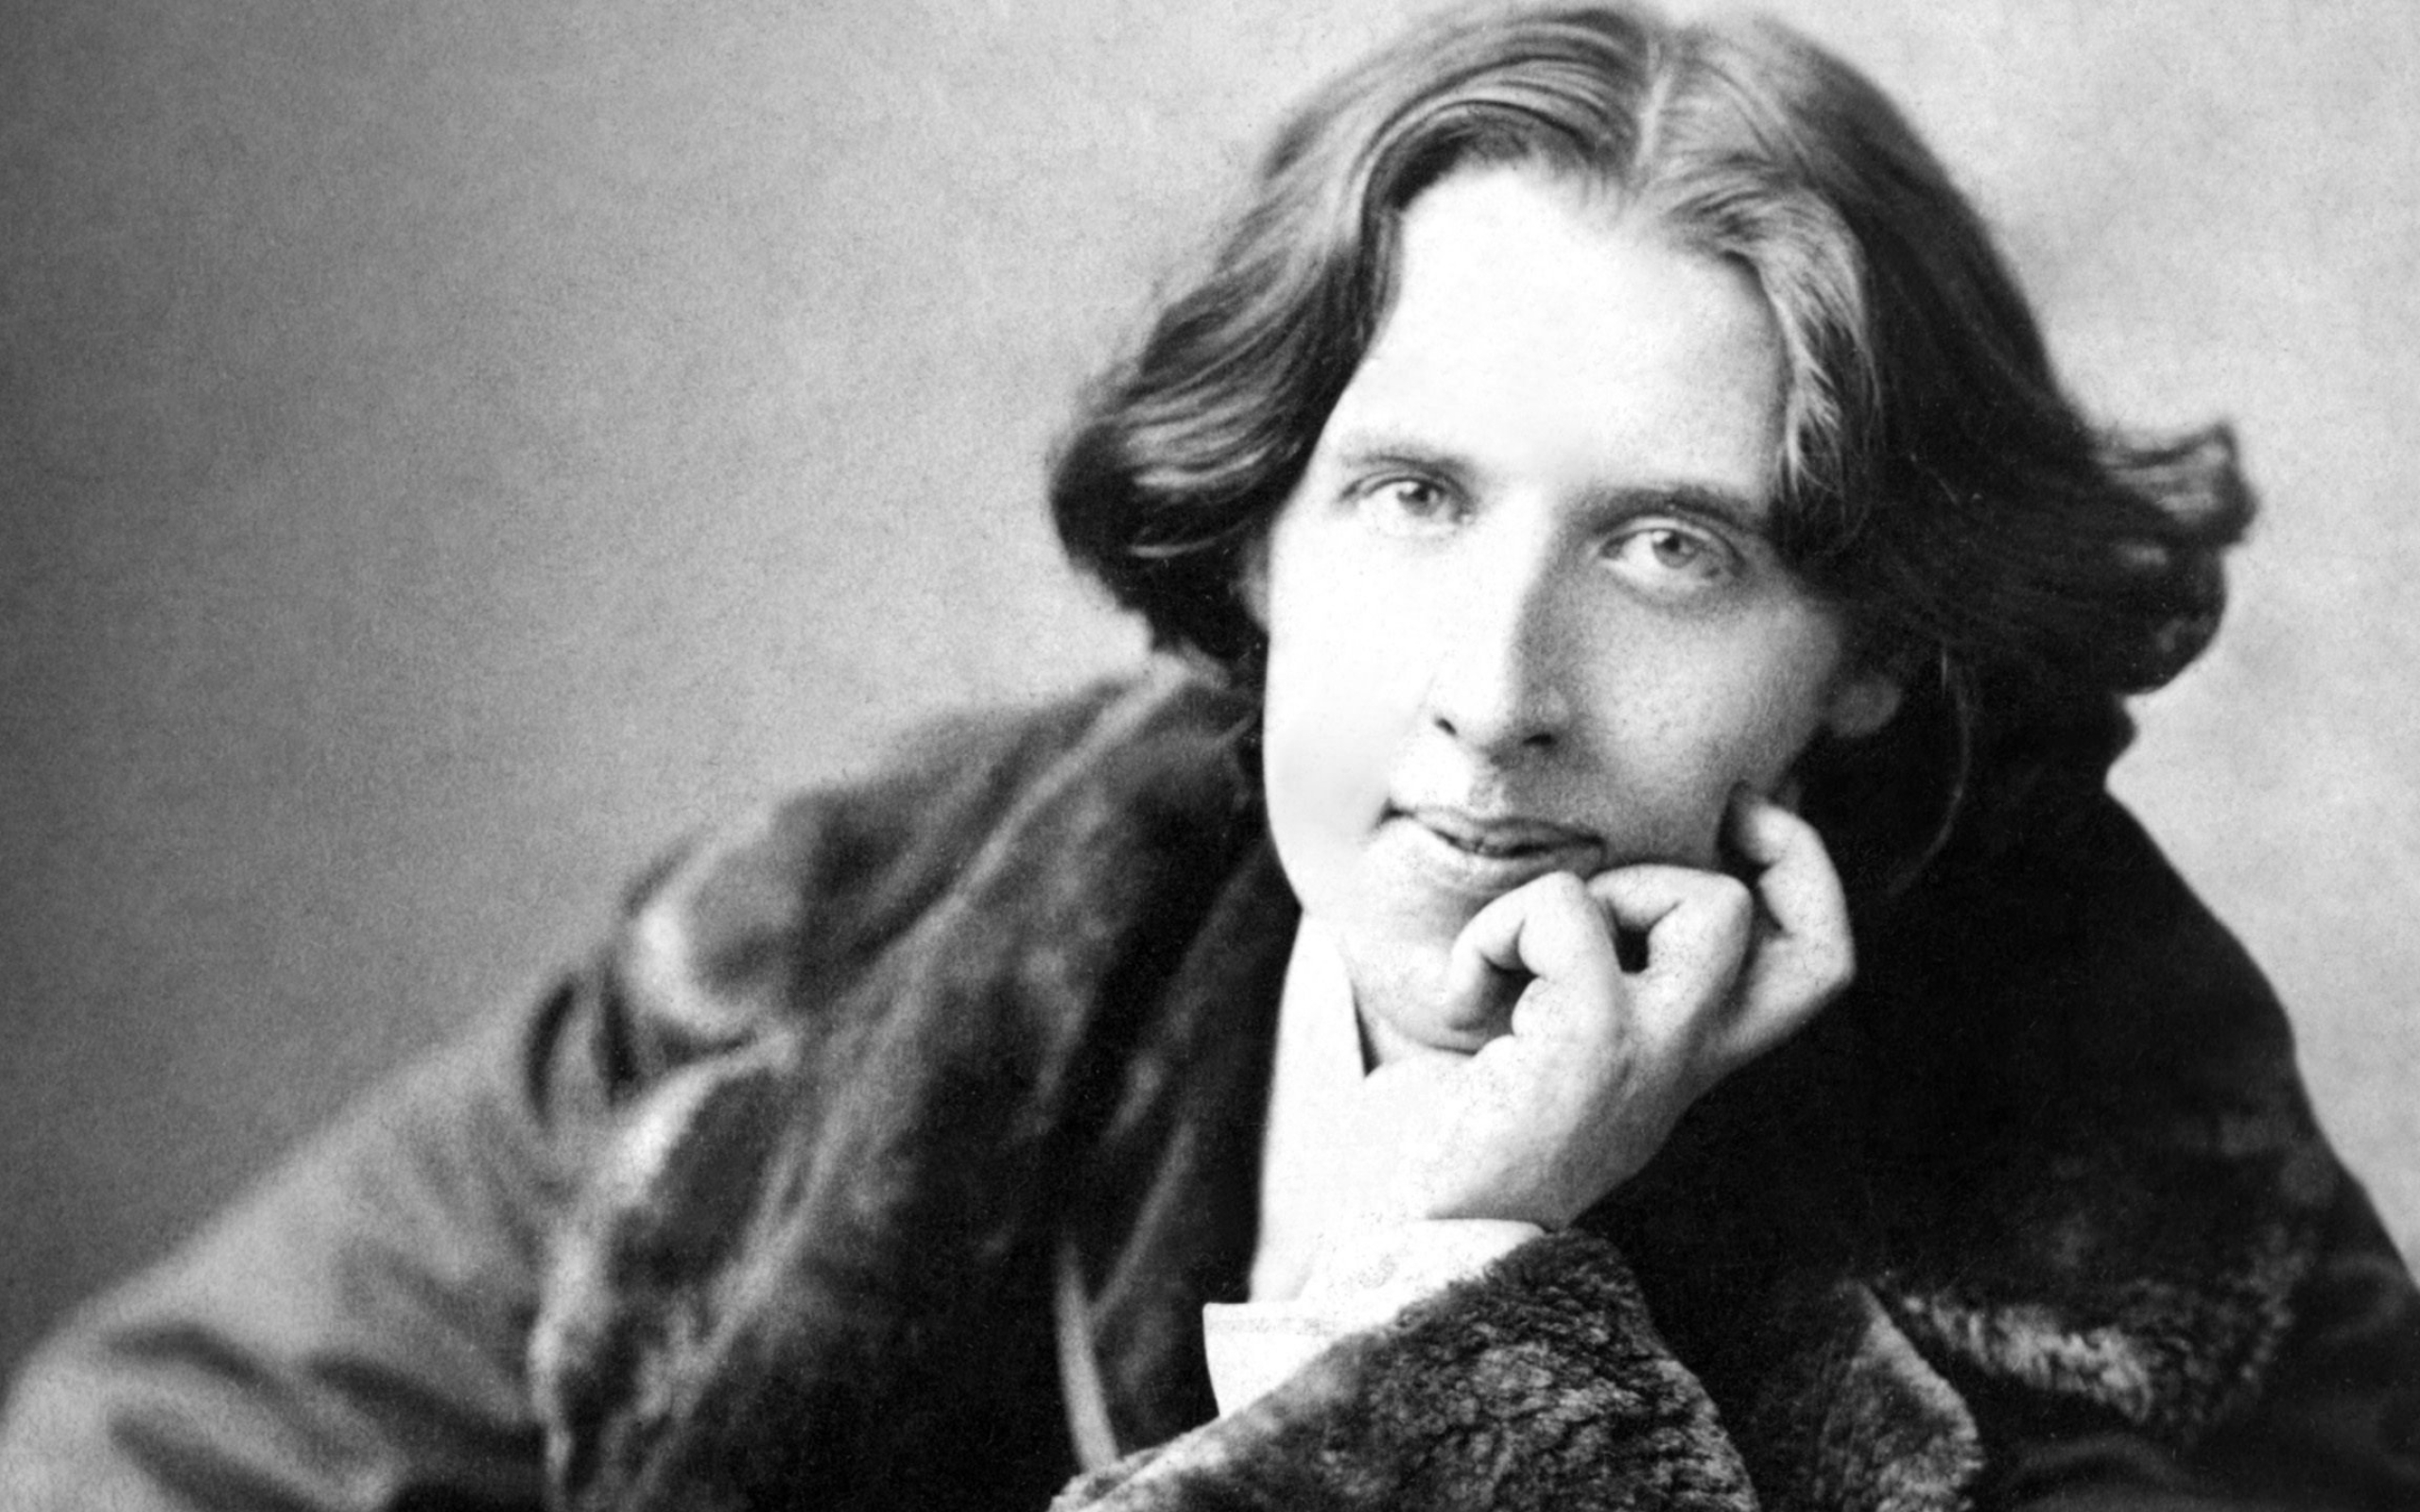 Oscar Wilde, Witty wallpapers, Literary genius, Iconic quotes, 2560x1600 HD Desktop